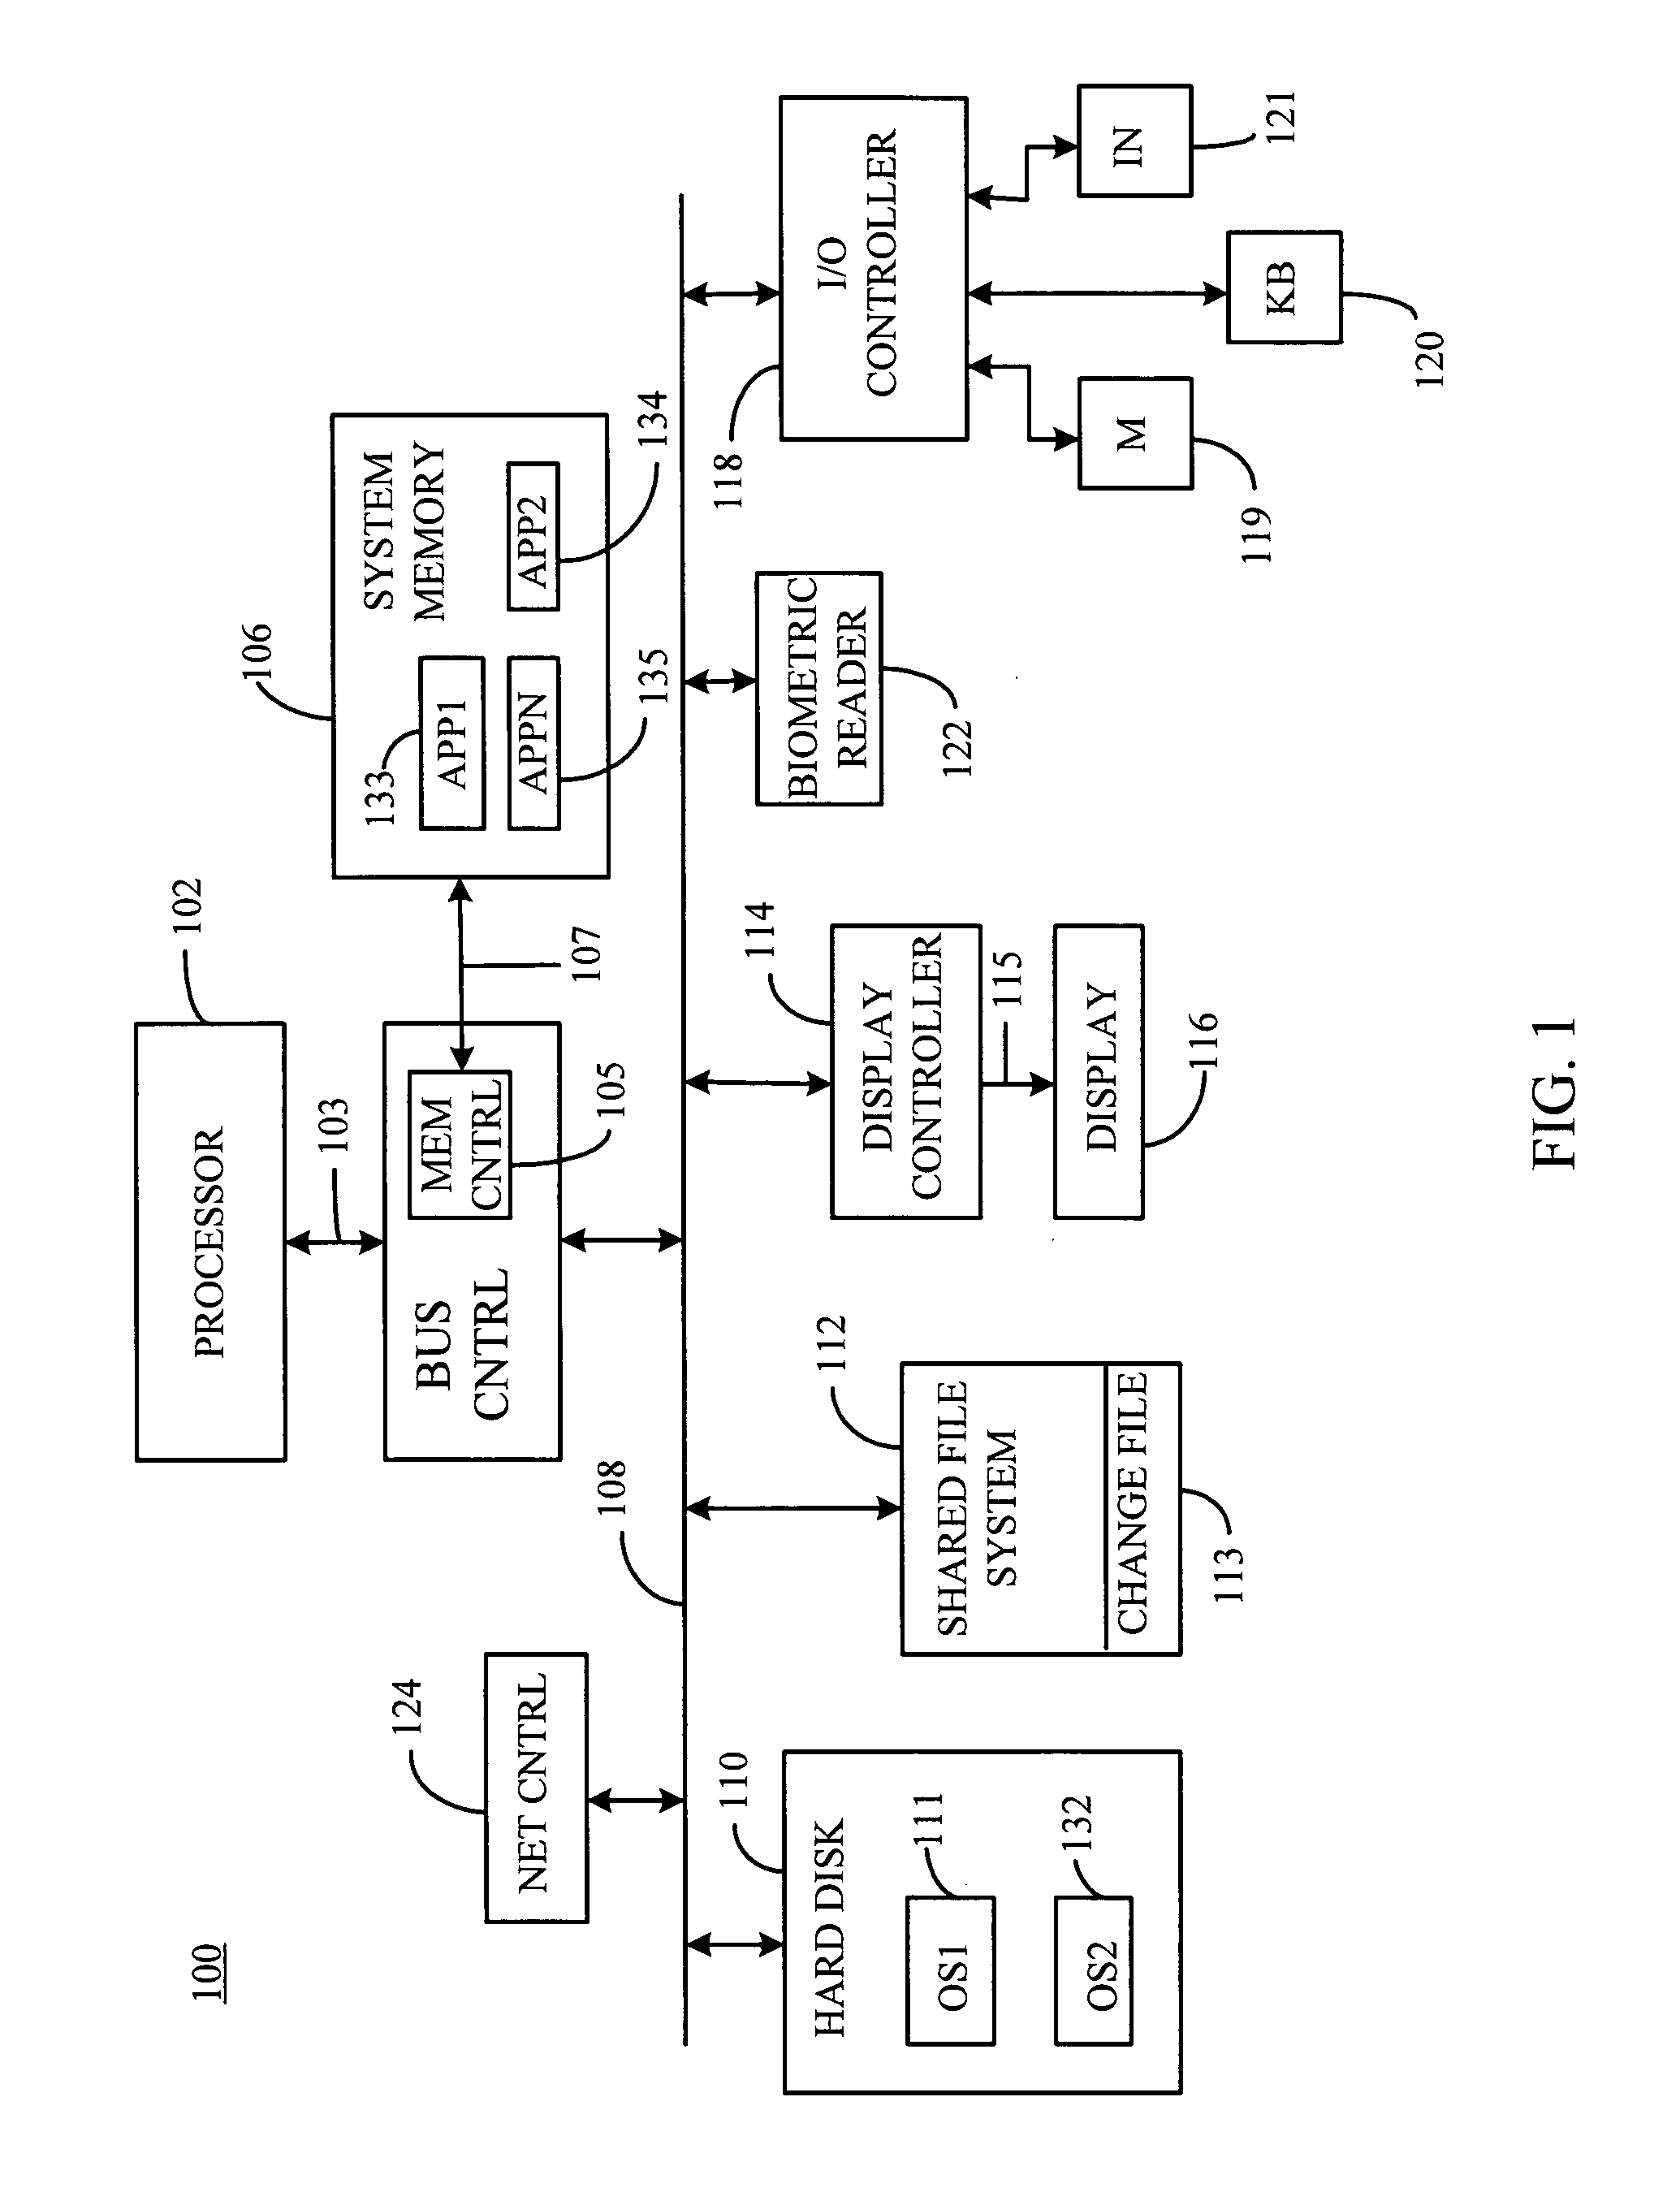 Shared file system management between independent operating systems